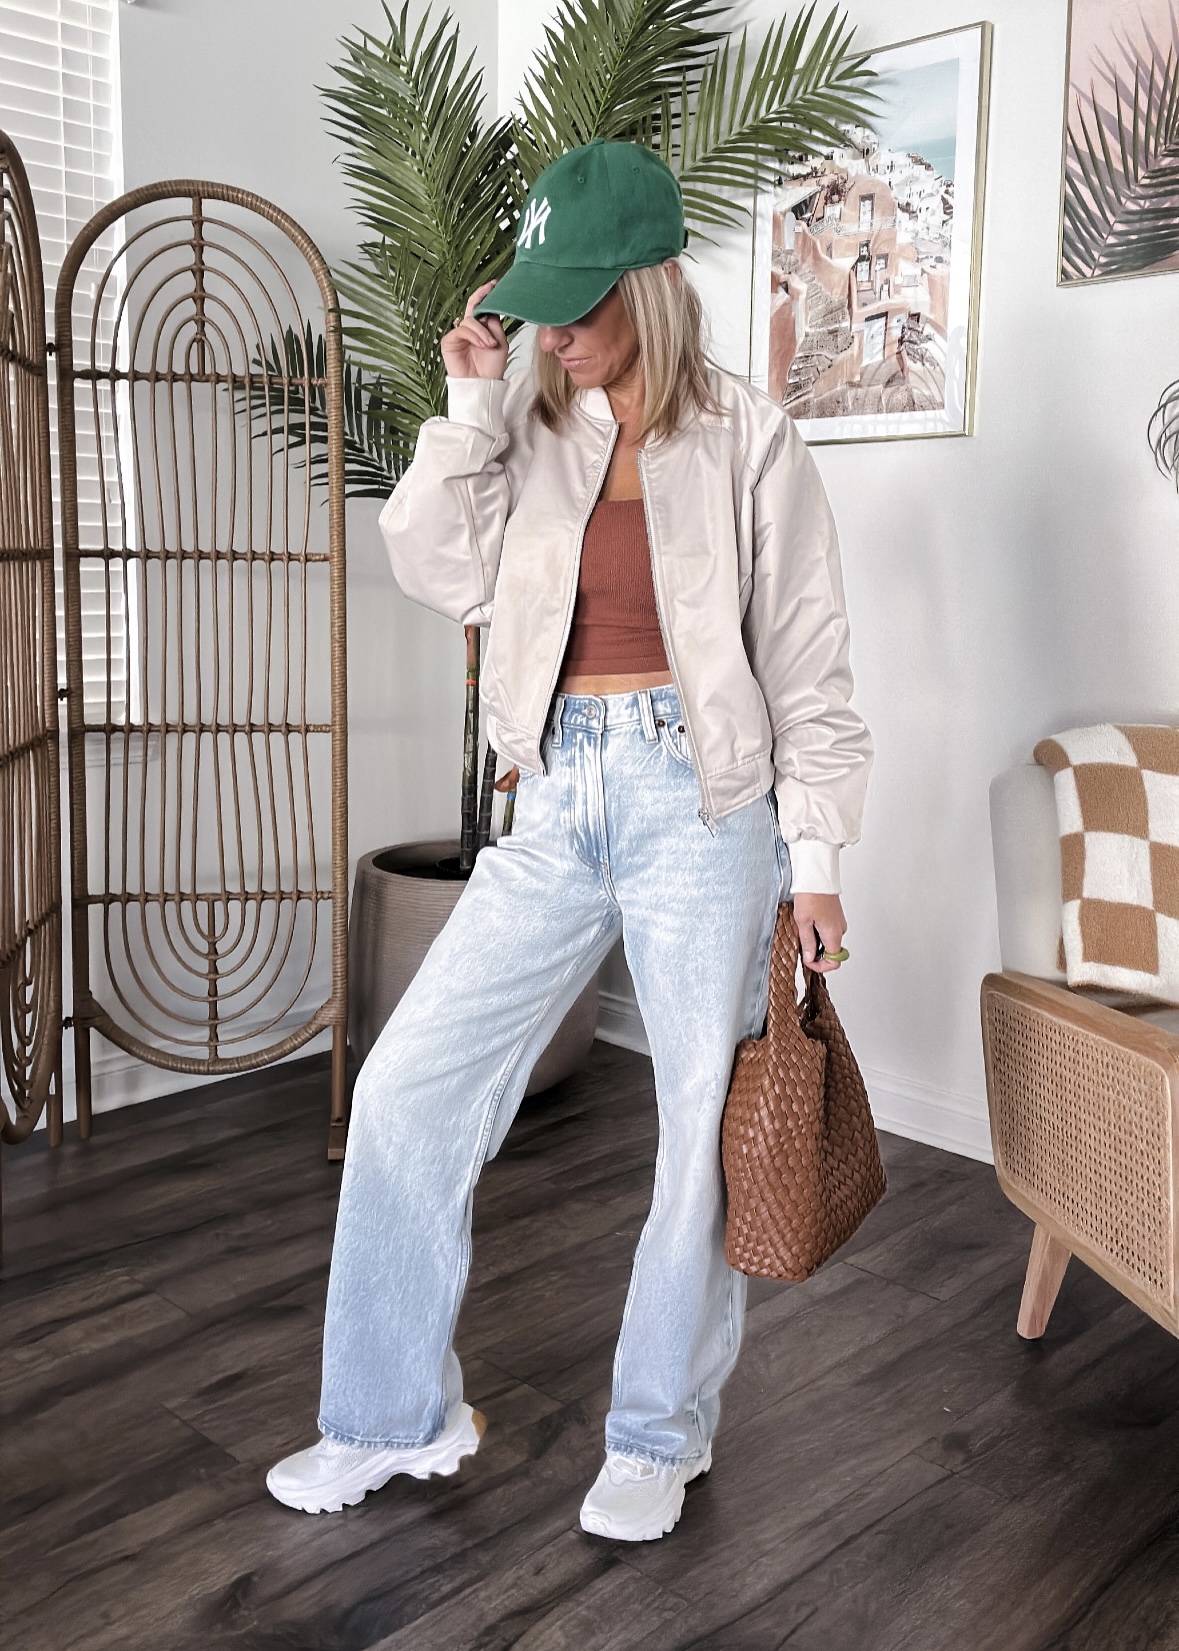 Styling New Spring Trends-Jaclyn De Leon style. New trends that I am loving this spring include sheer tops, maxi skirts, cargo, baggy jeans + bomber jackets. Here is a few looks I put together with fresh new style trends for Spring.